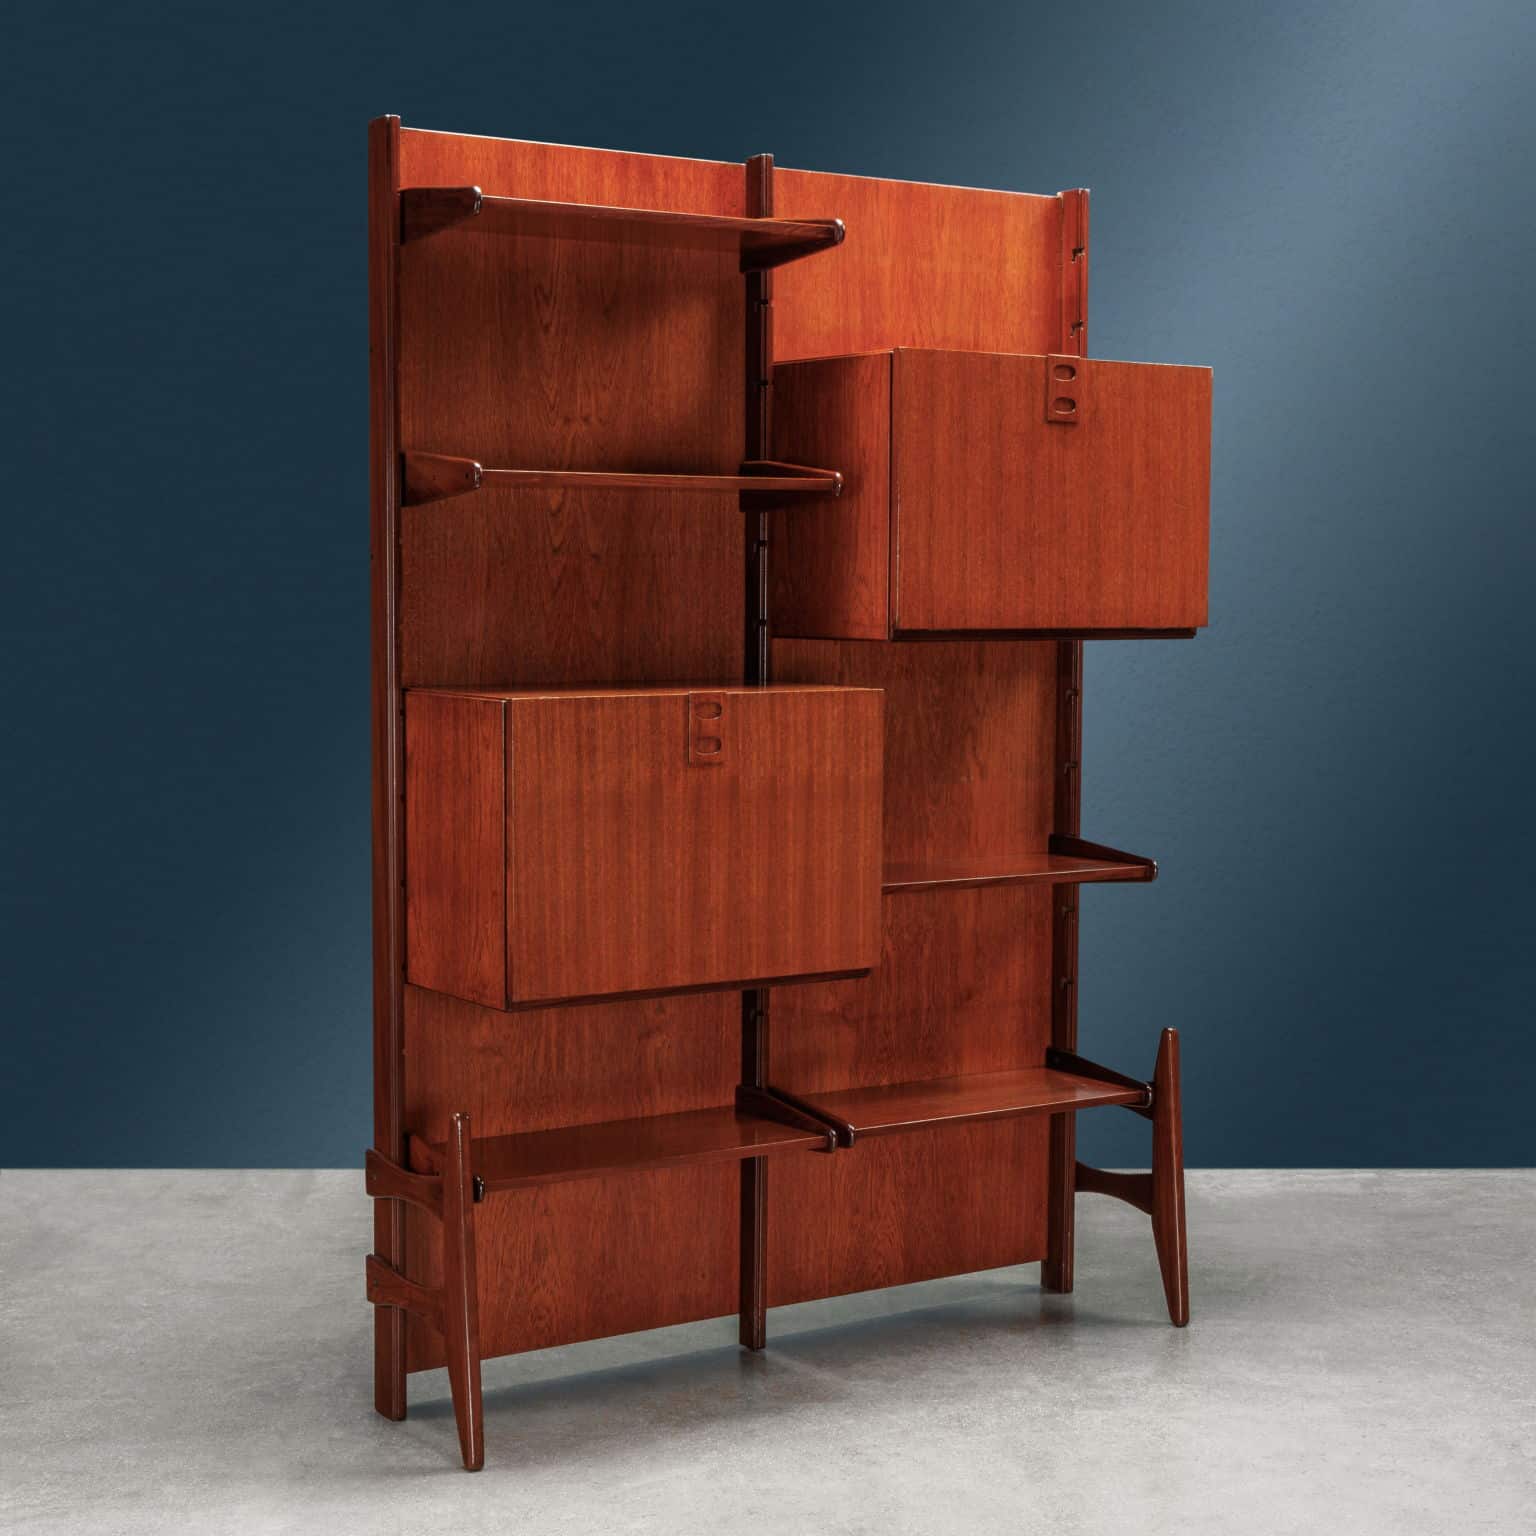 Open cabinet from the 50s and 60s, produced by Fratelli Proserpio